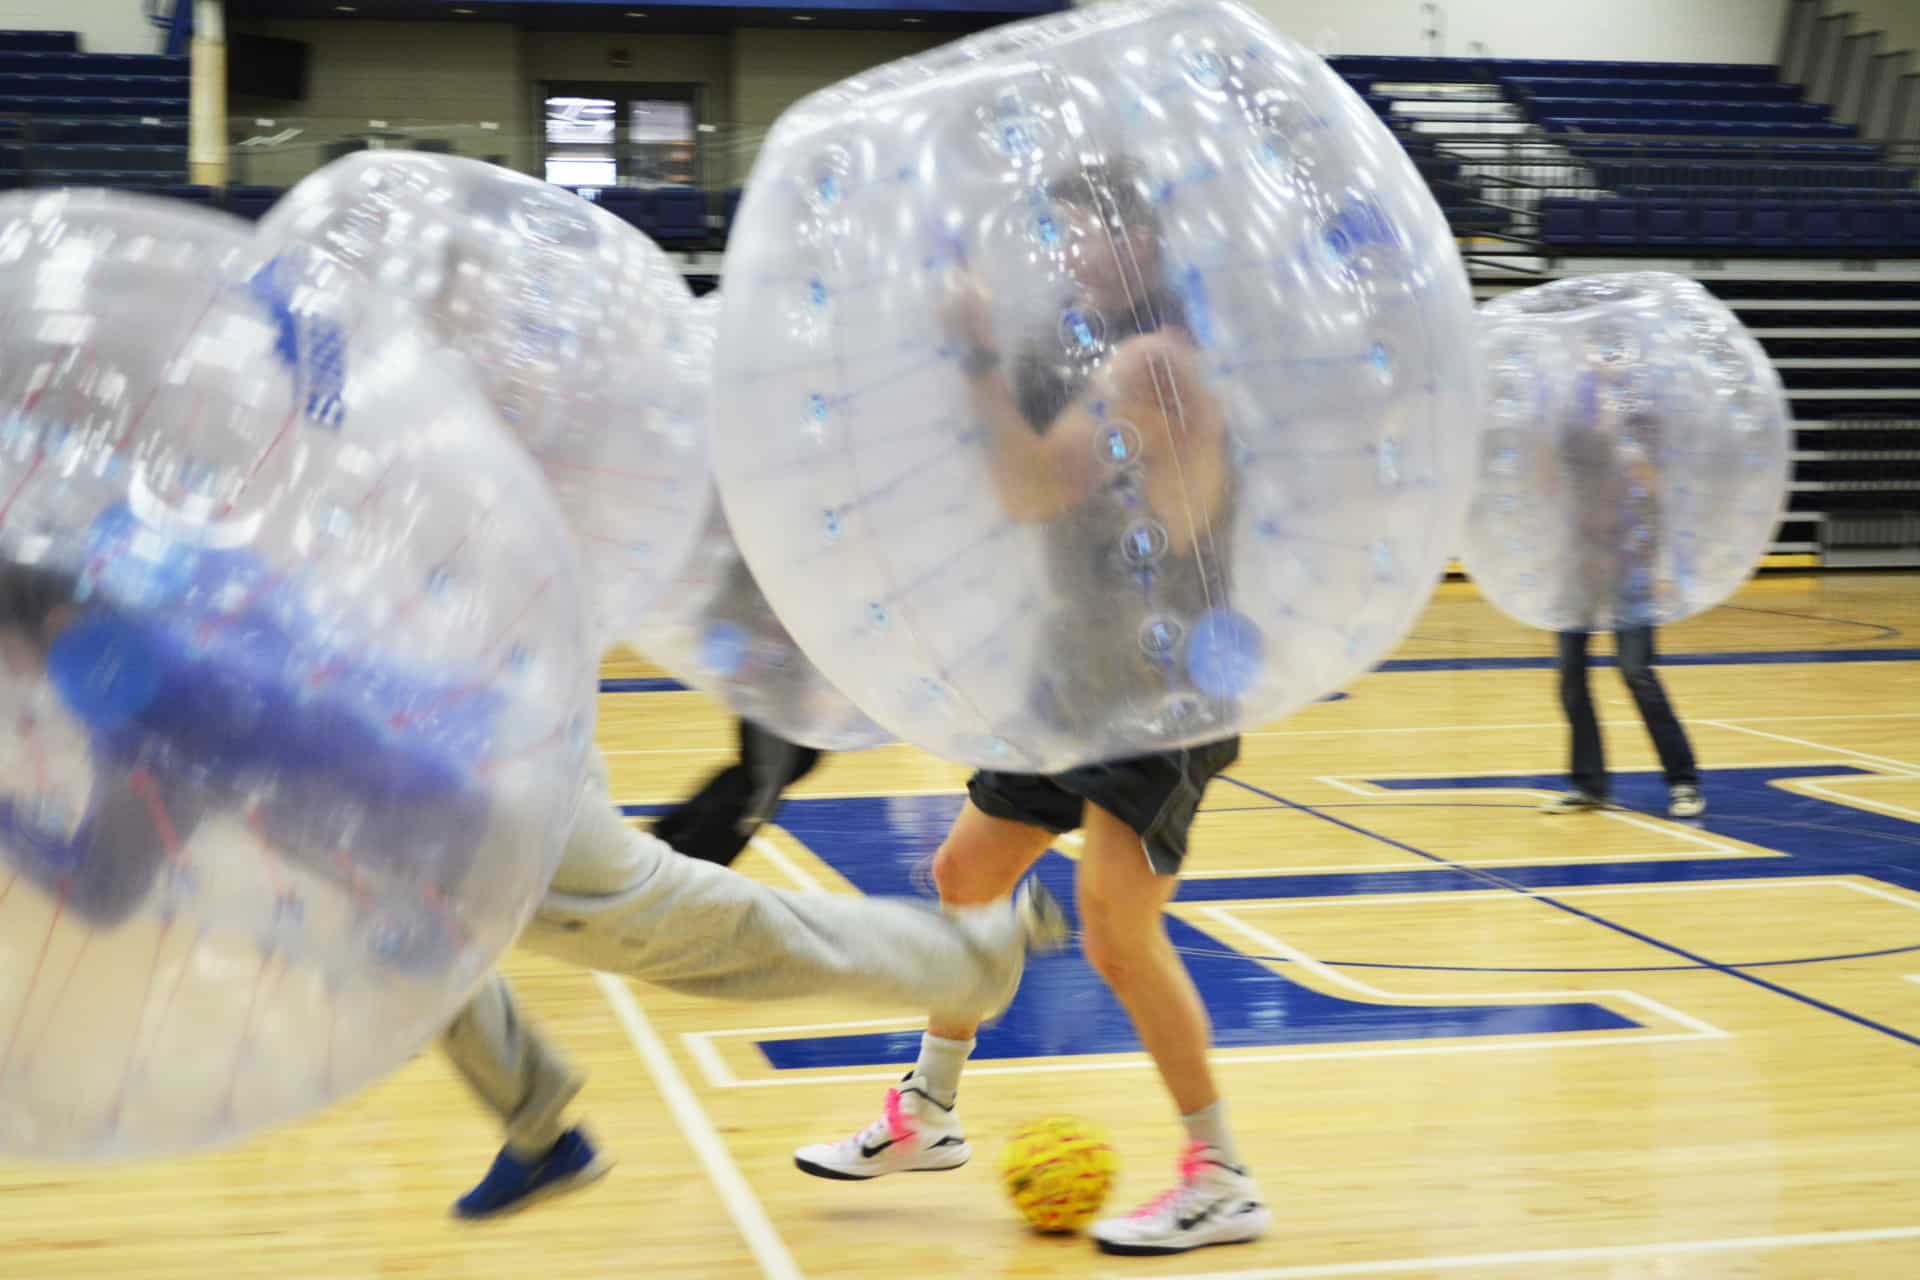 Students playing Bubble Soccer.